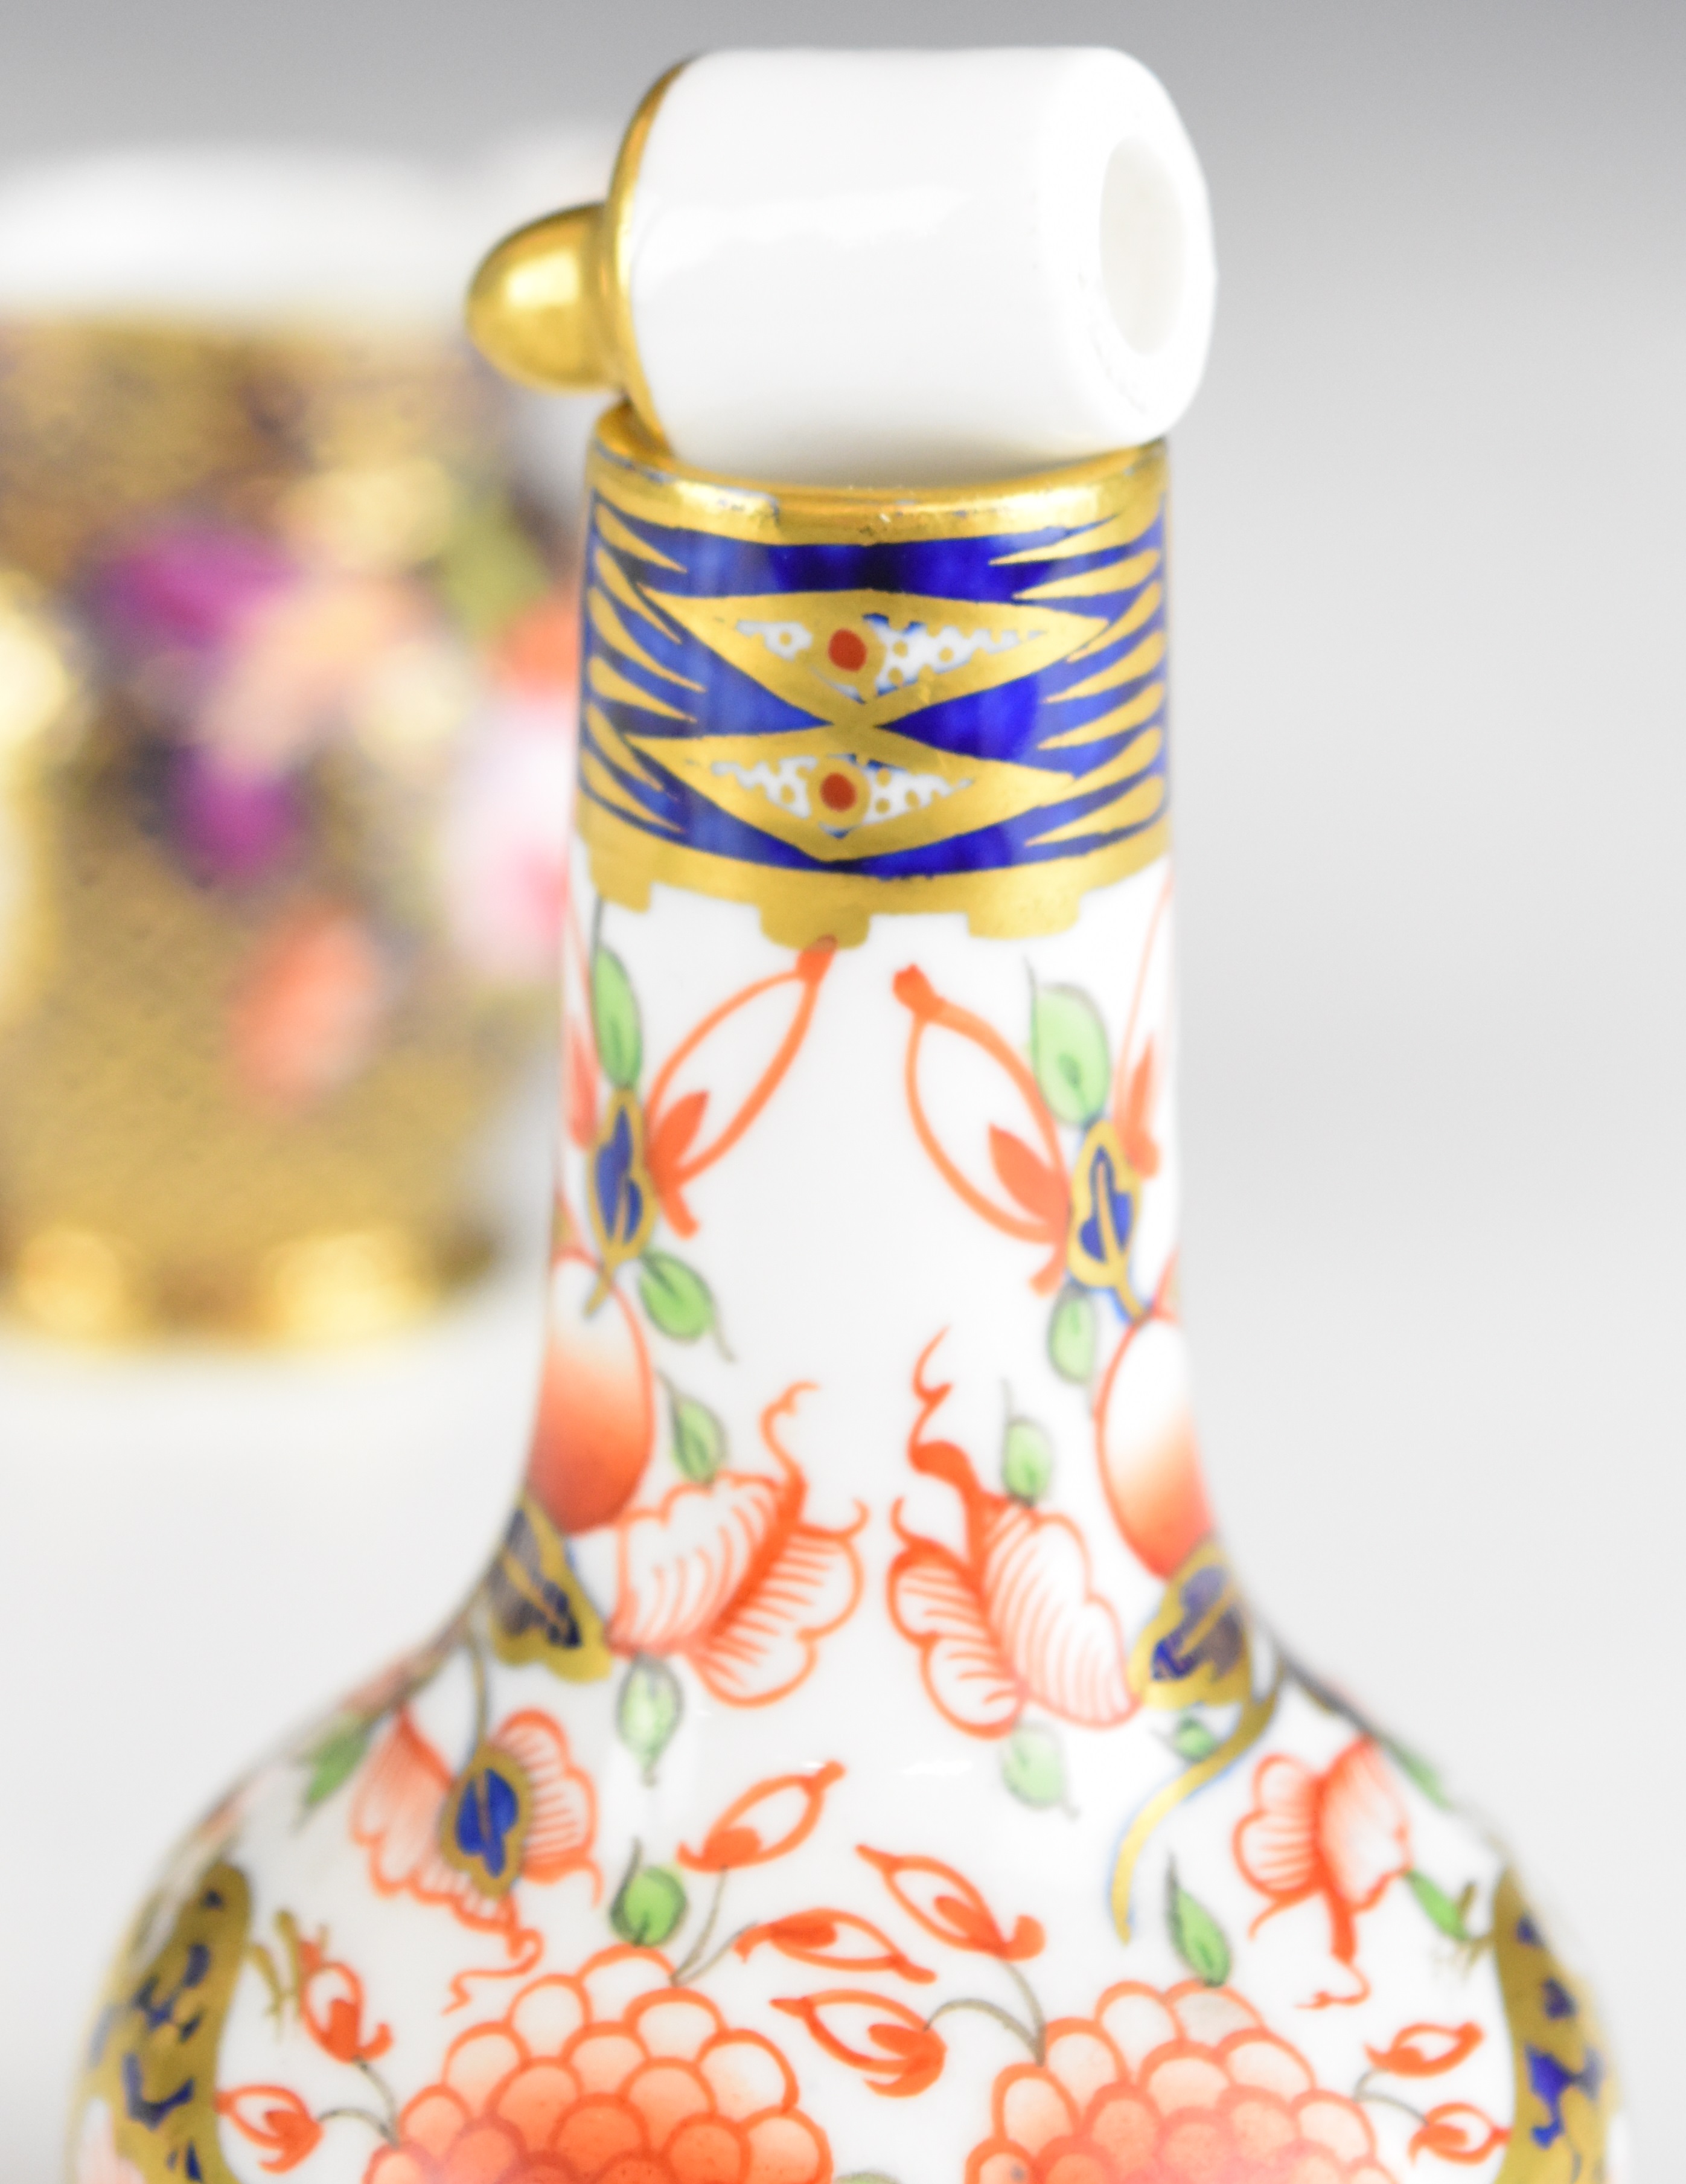 Crown Derby Imari and Davenport covered scent / perfume bottles, Coalport miniature jug with - Image 11 of 14